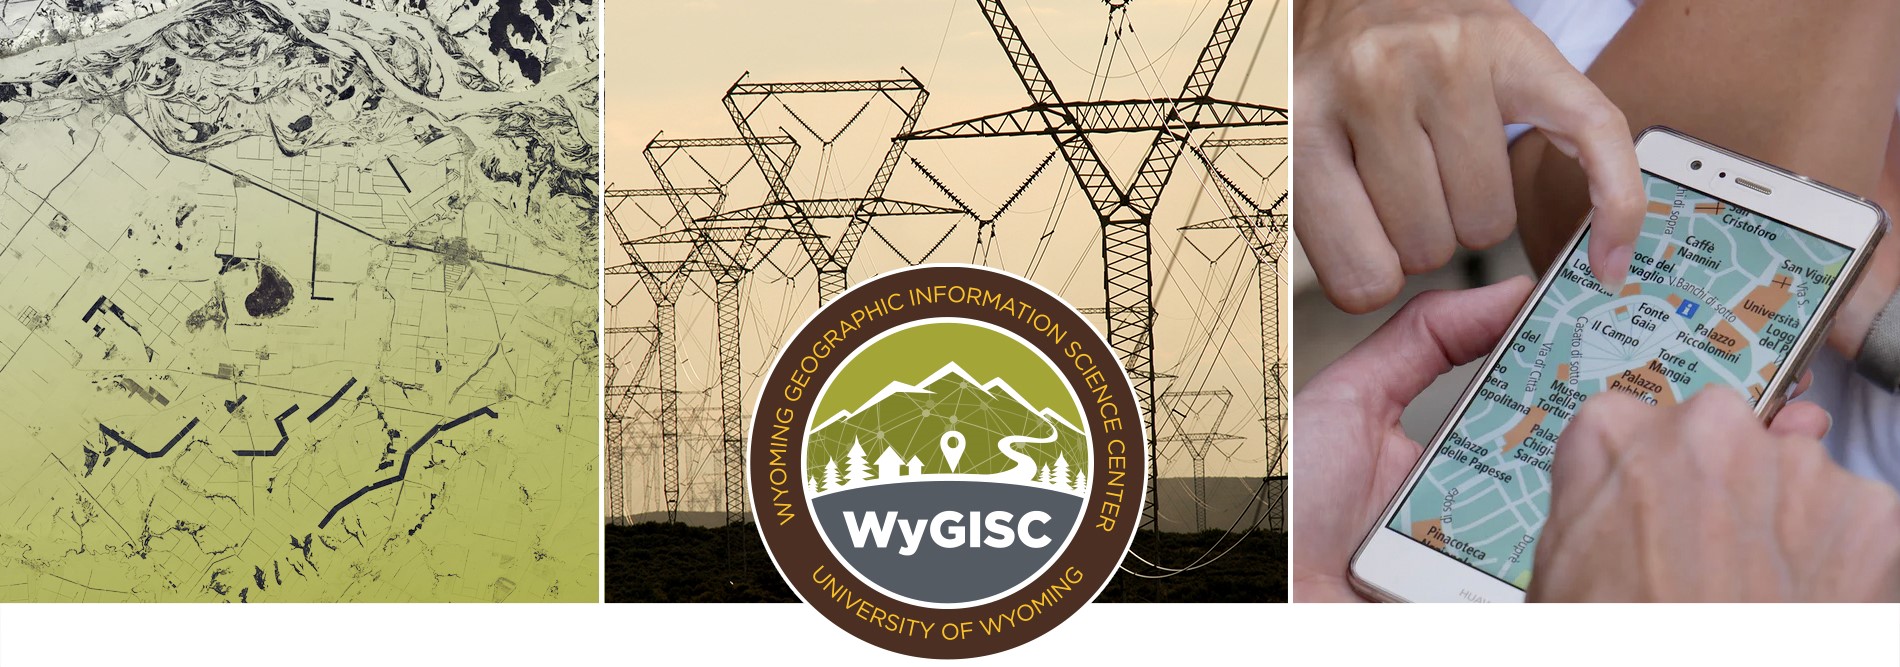 WyGISC lheader image over maps, and electric towers